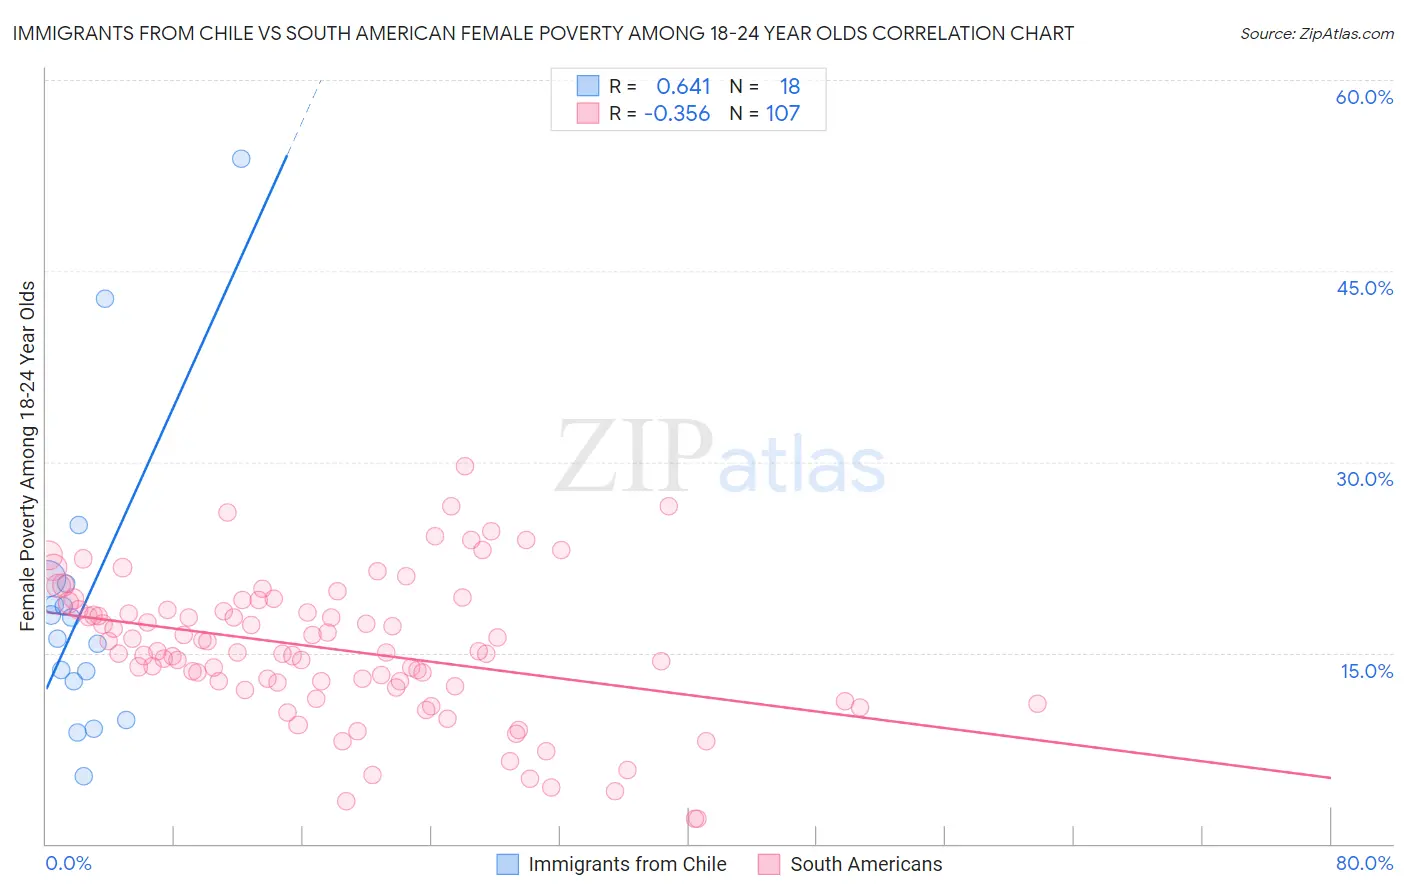 Immigrants from Chile vs South American Female Poverty Among 18-24 Year Olds